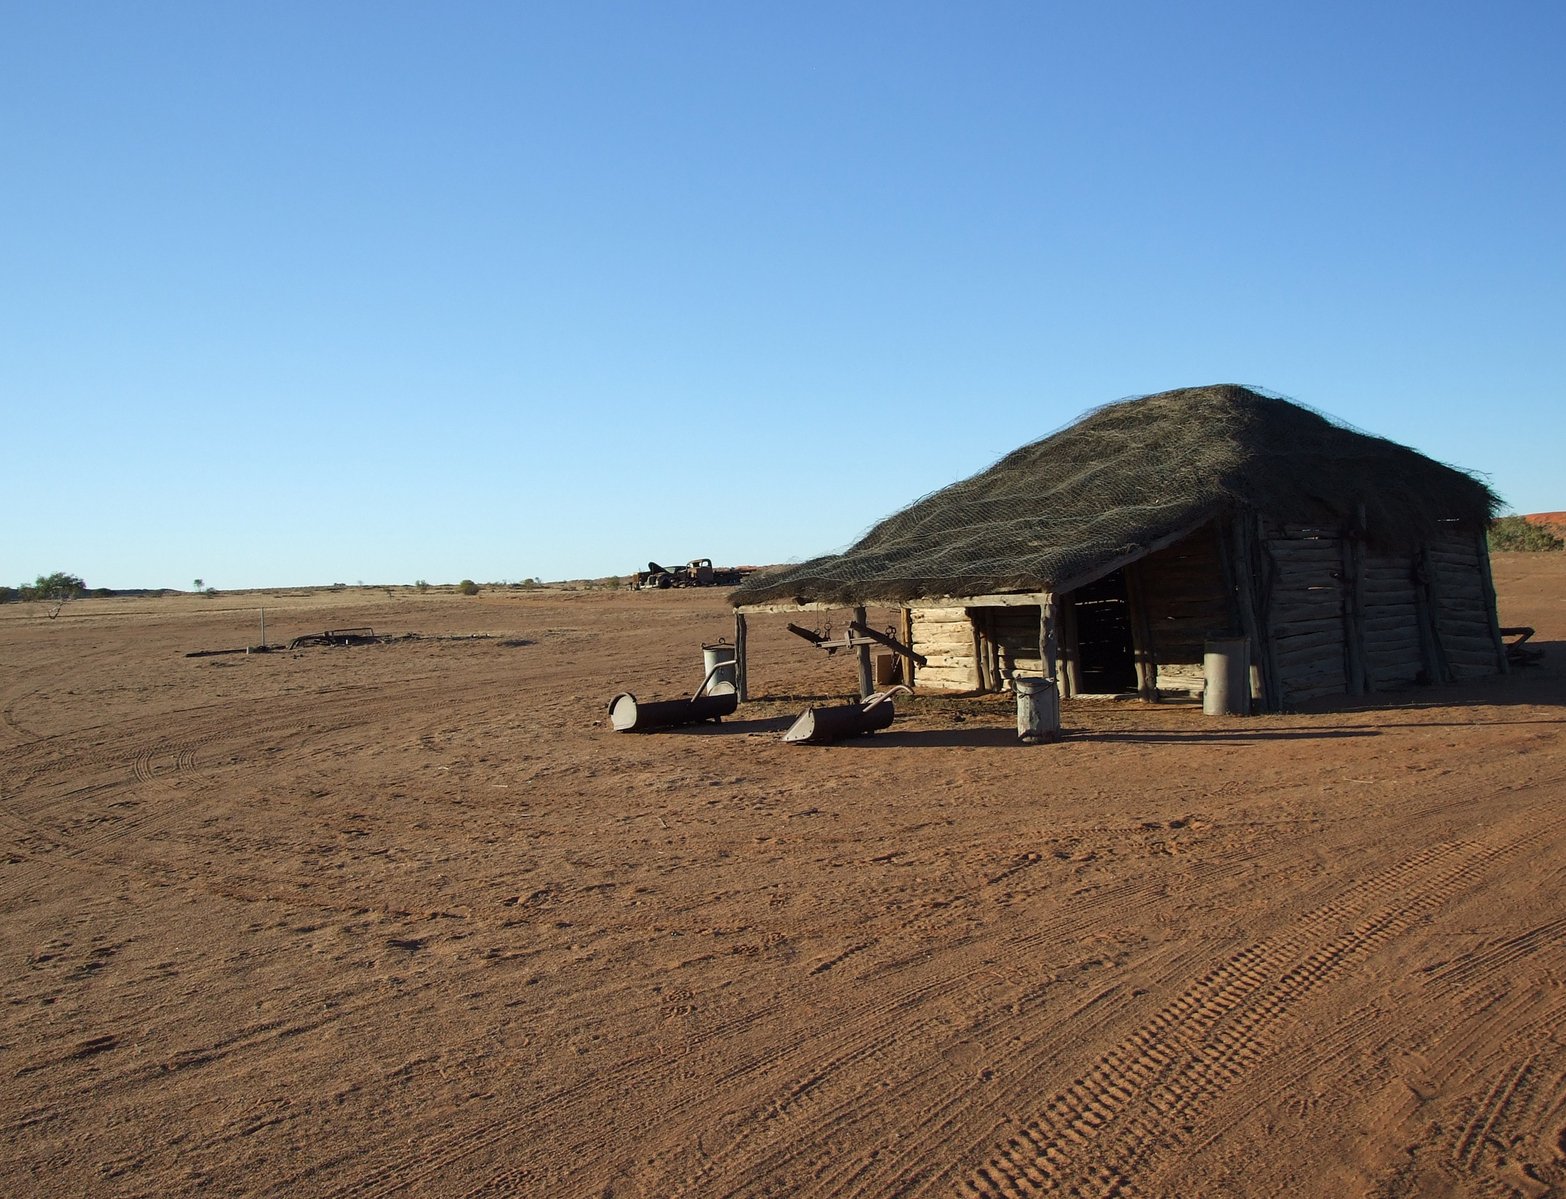 an out house in the middle of a dirt field